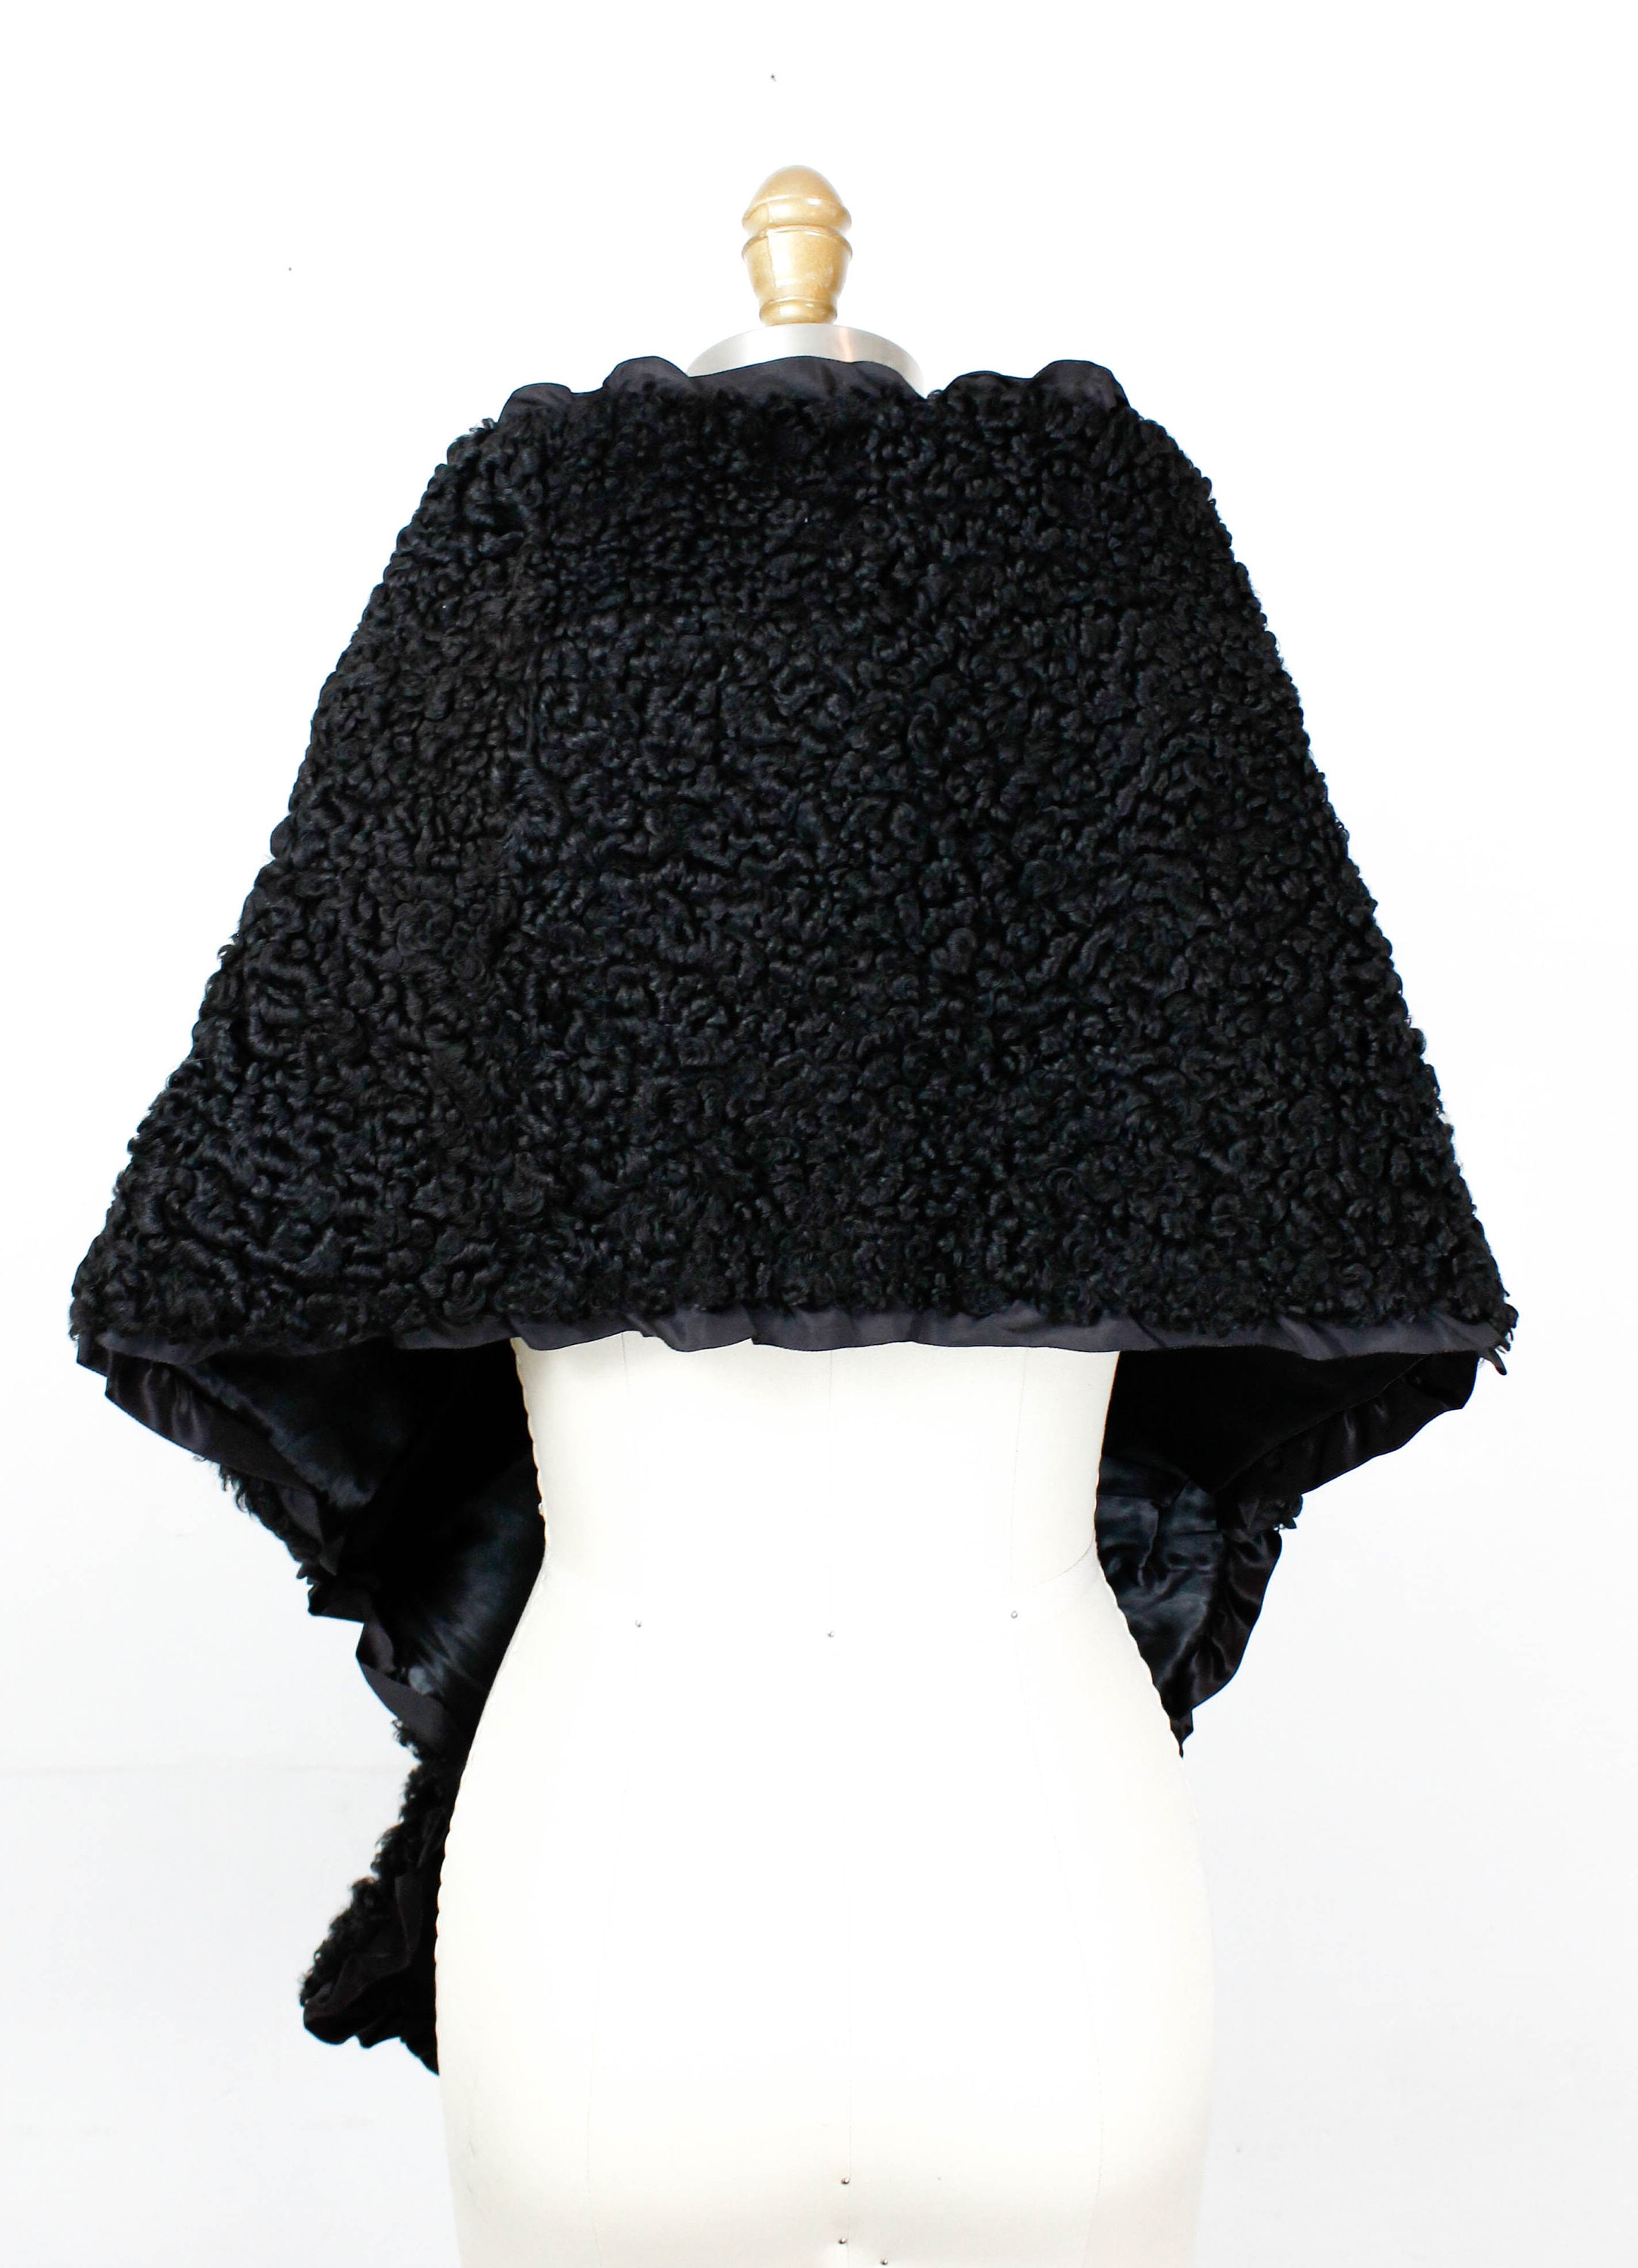 1950s black Persian lamb's wool stole by Gimbel Brothers